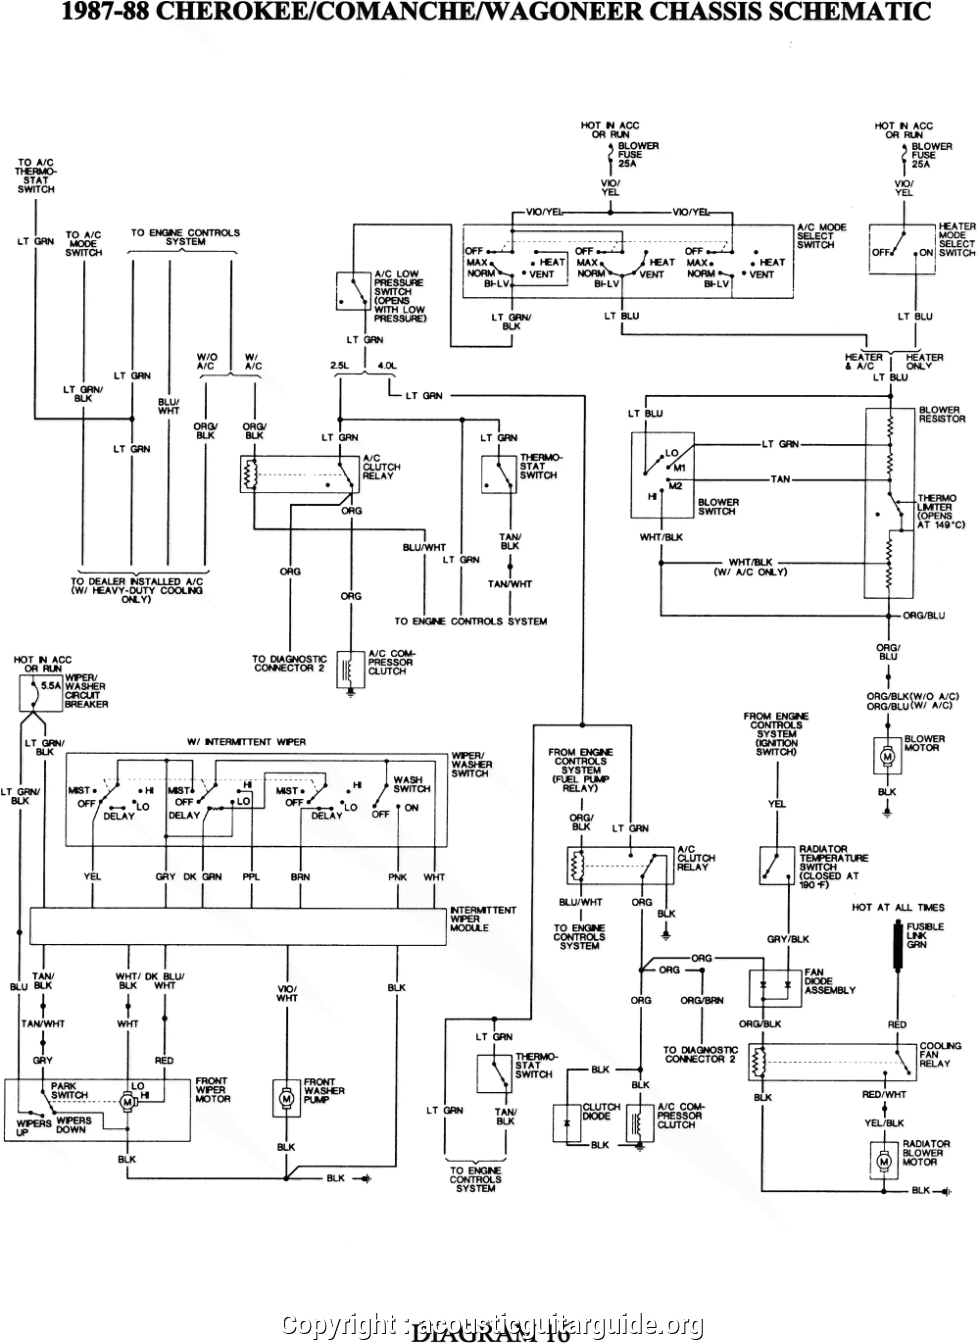 wiring diagram for a truck on jeep grand cherokee headlight diagram 2007 jeep grand cherokee headlight wiring diagram